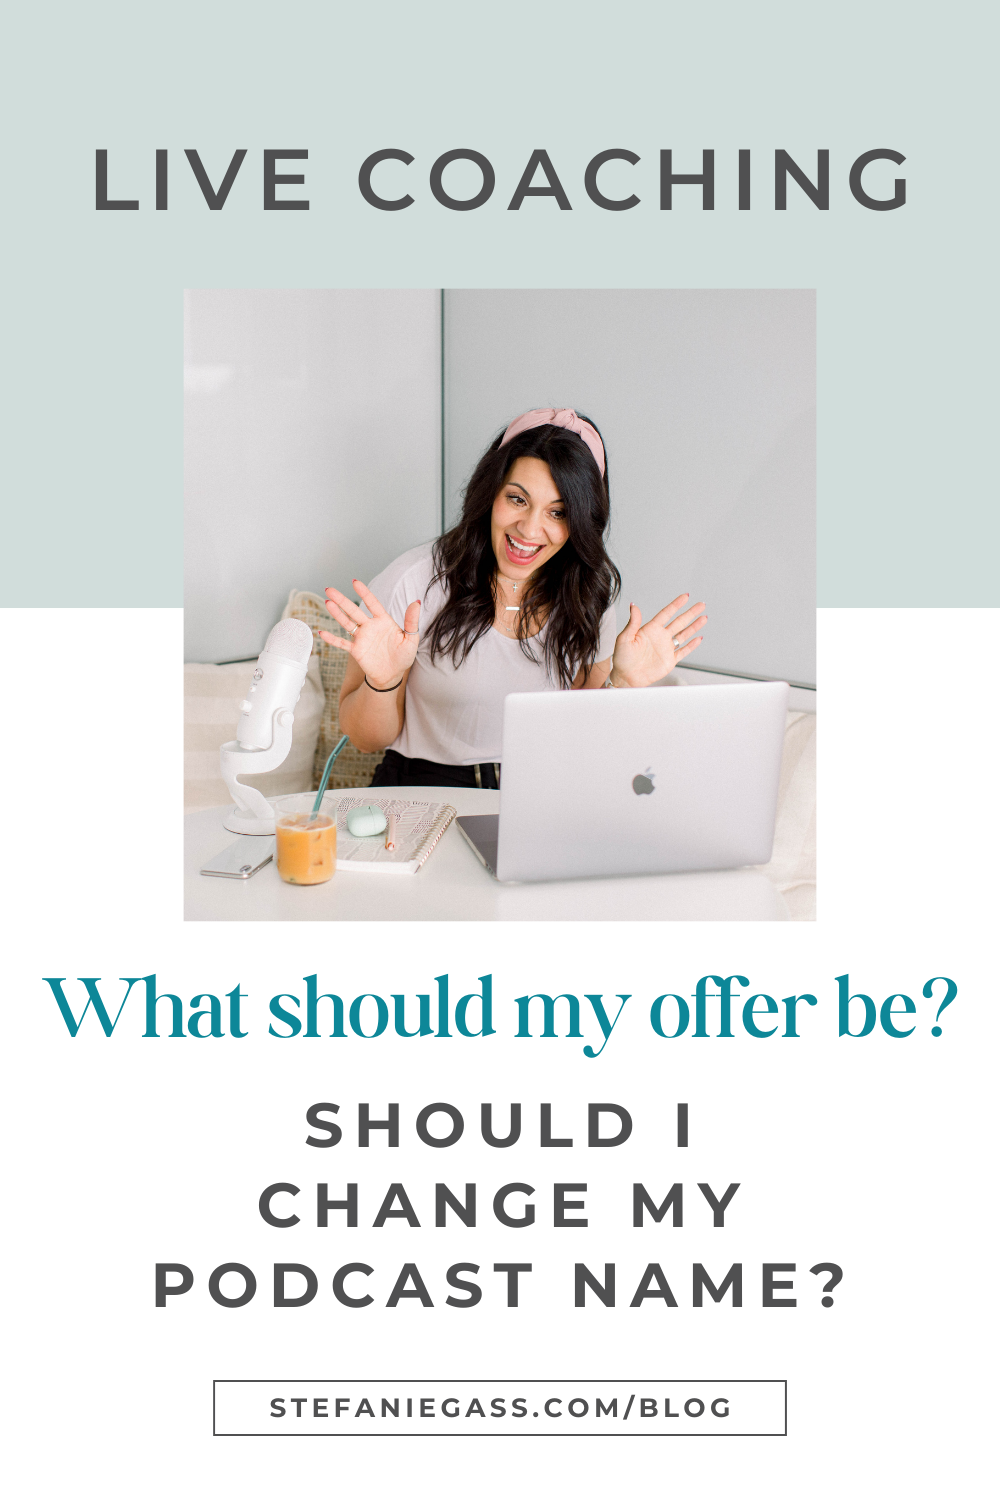 smiling woman with her hands in the air as she looks at her laptop screen and speaks into her podcast microphone.  Text reads:  Live Coaching  What should my offer be?  Should I change my podcast name?